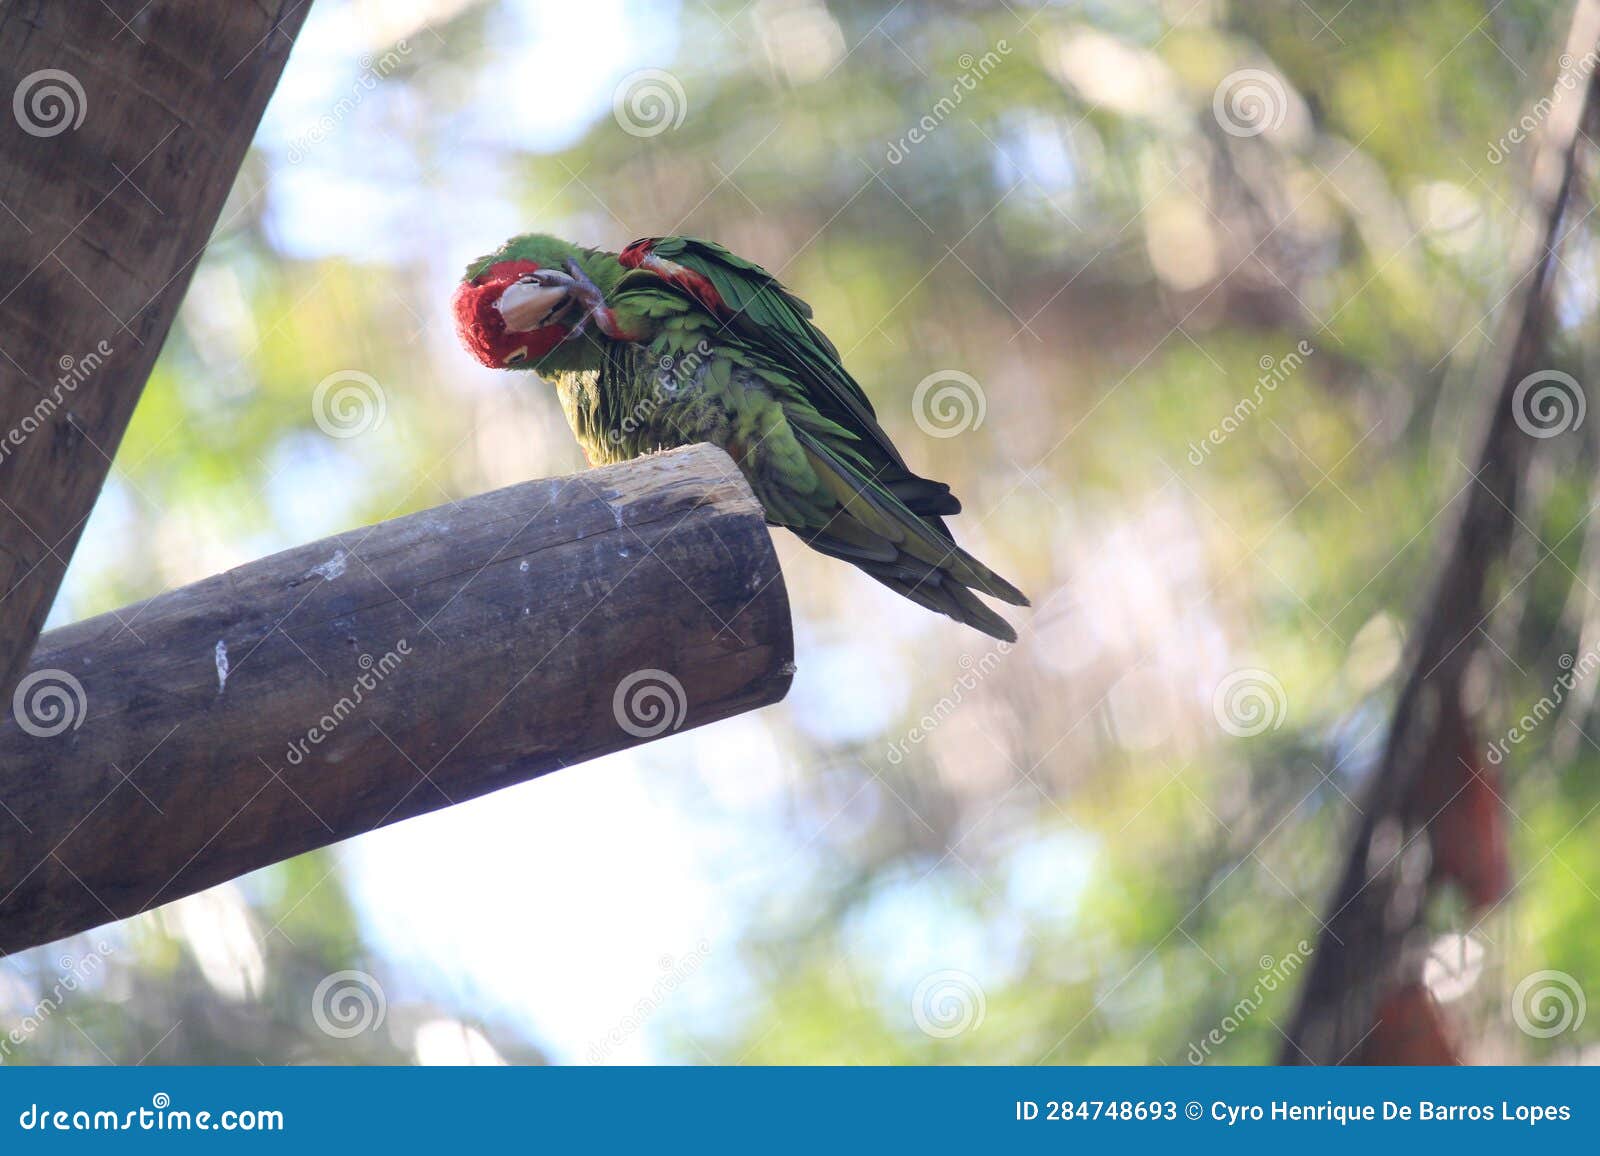 red-spectacled amazon standing in a wood structure